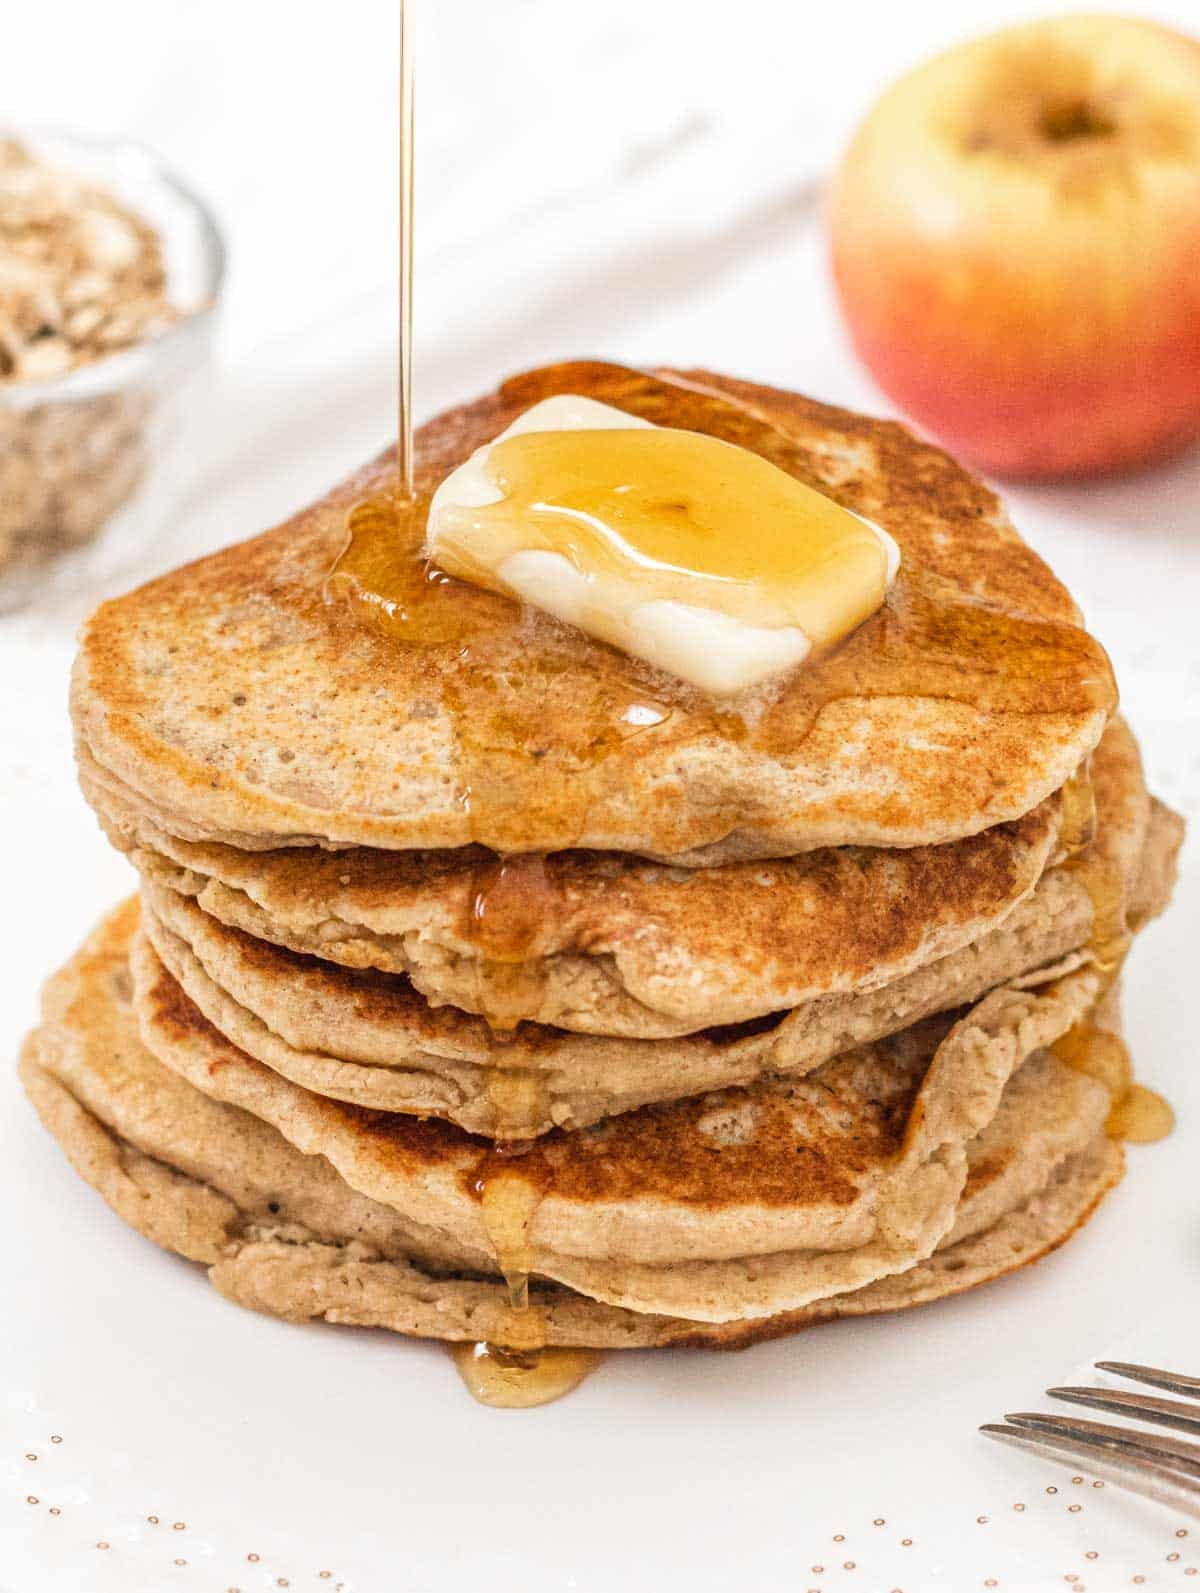 Oatmeal pancakes with syrup